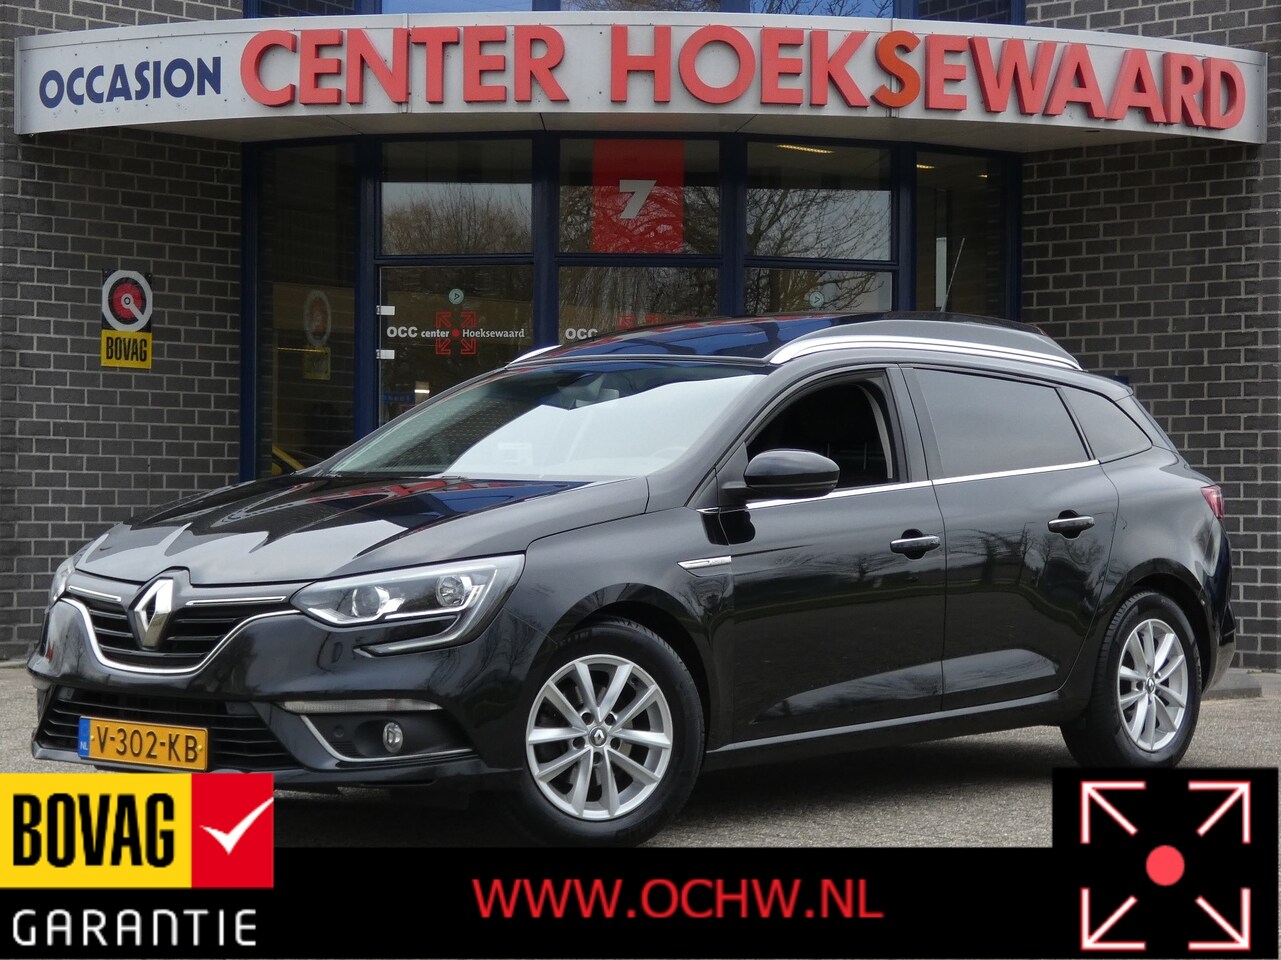 pad Bekend Sociaal renault megane estate diesel automaat used – Search for your used car on  the parking